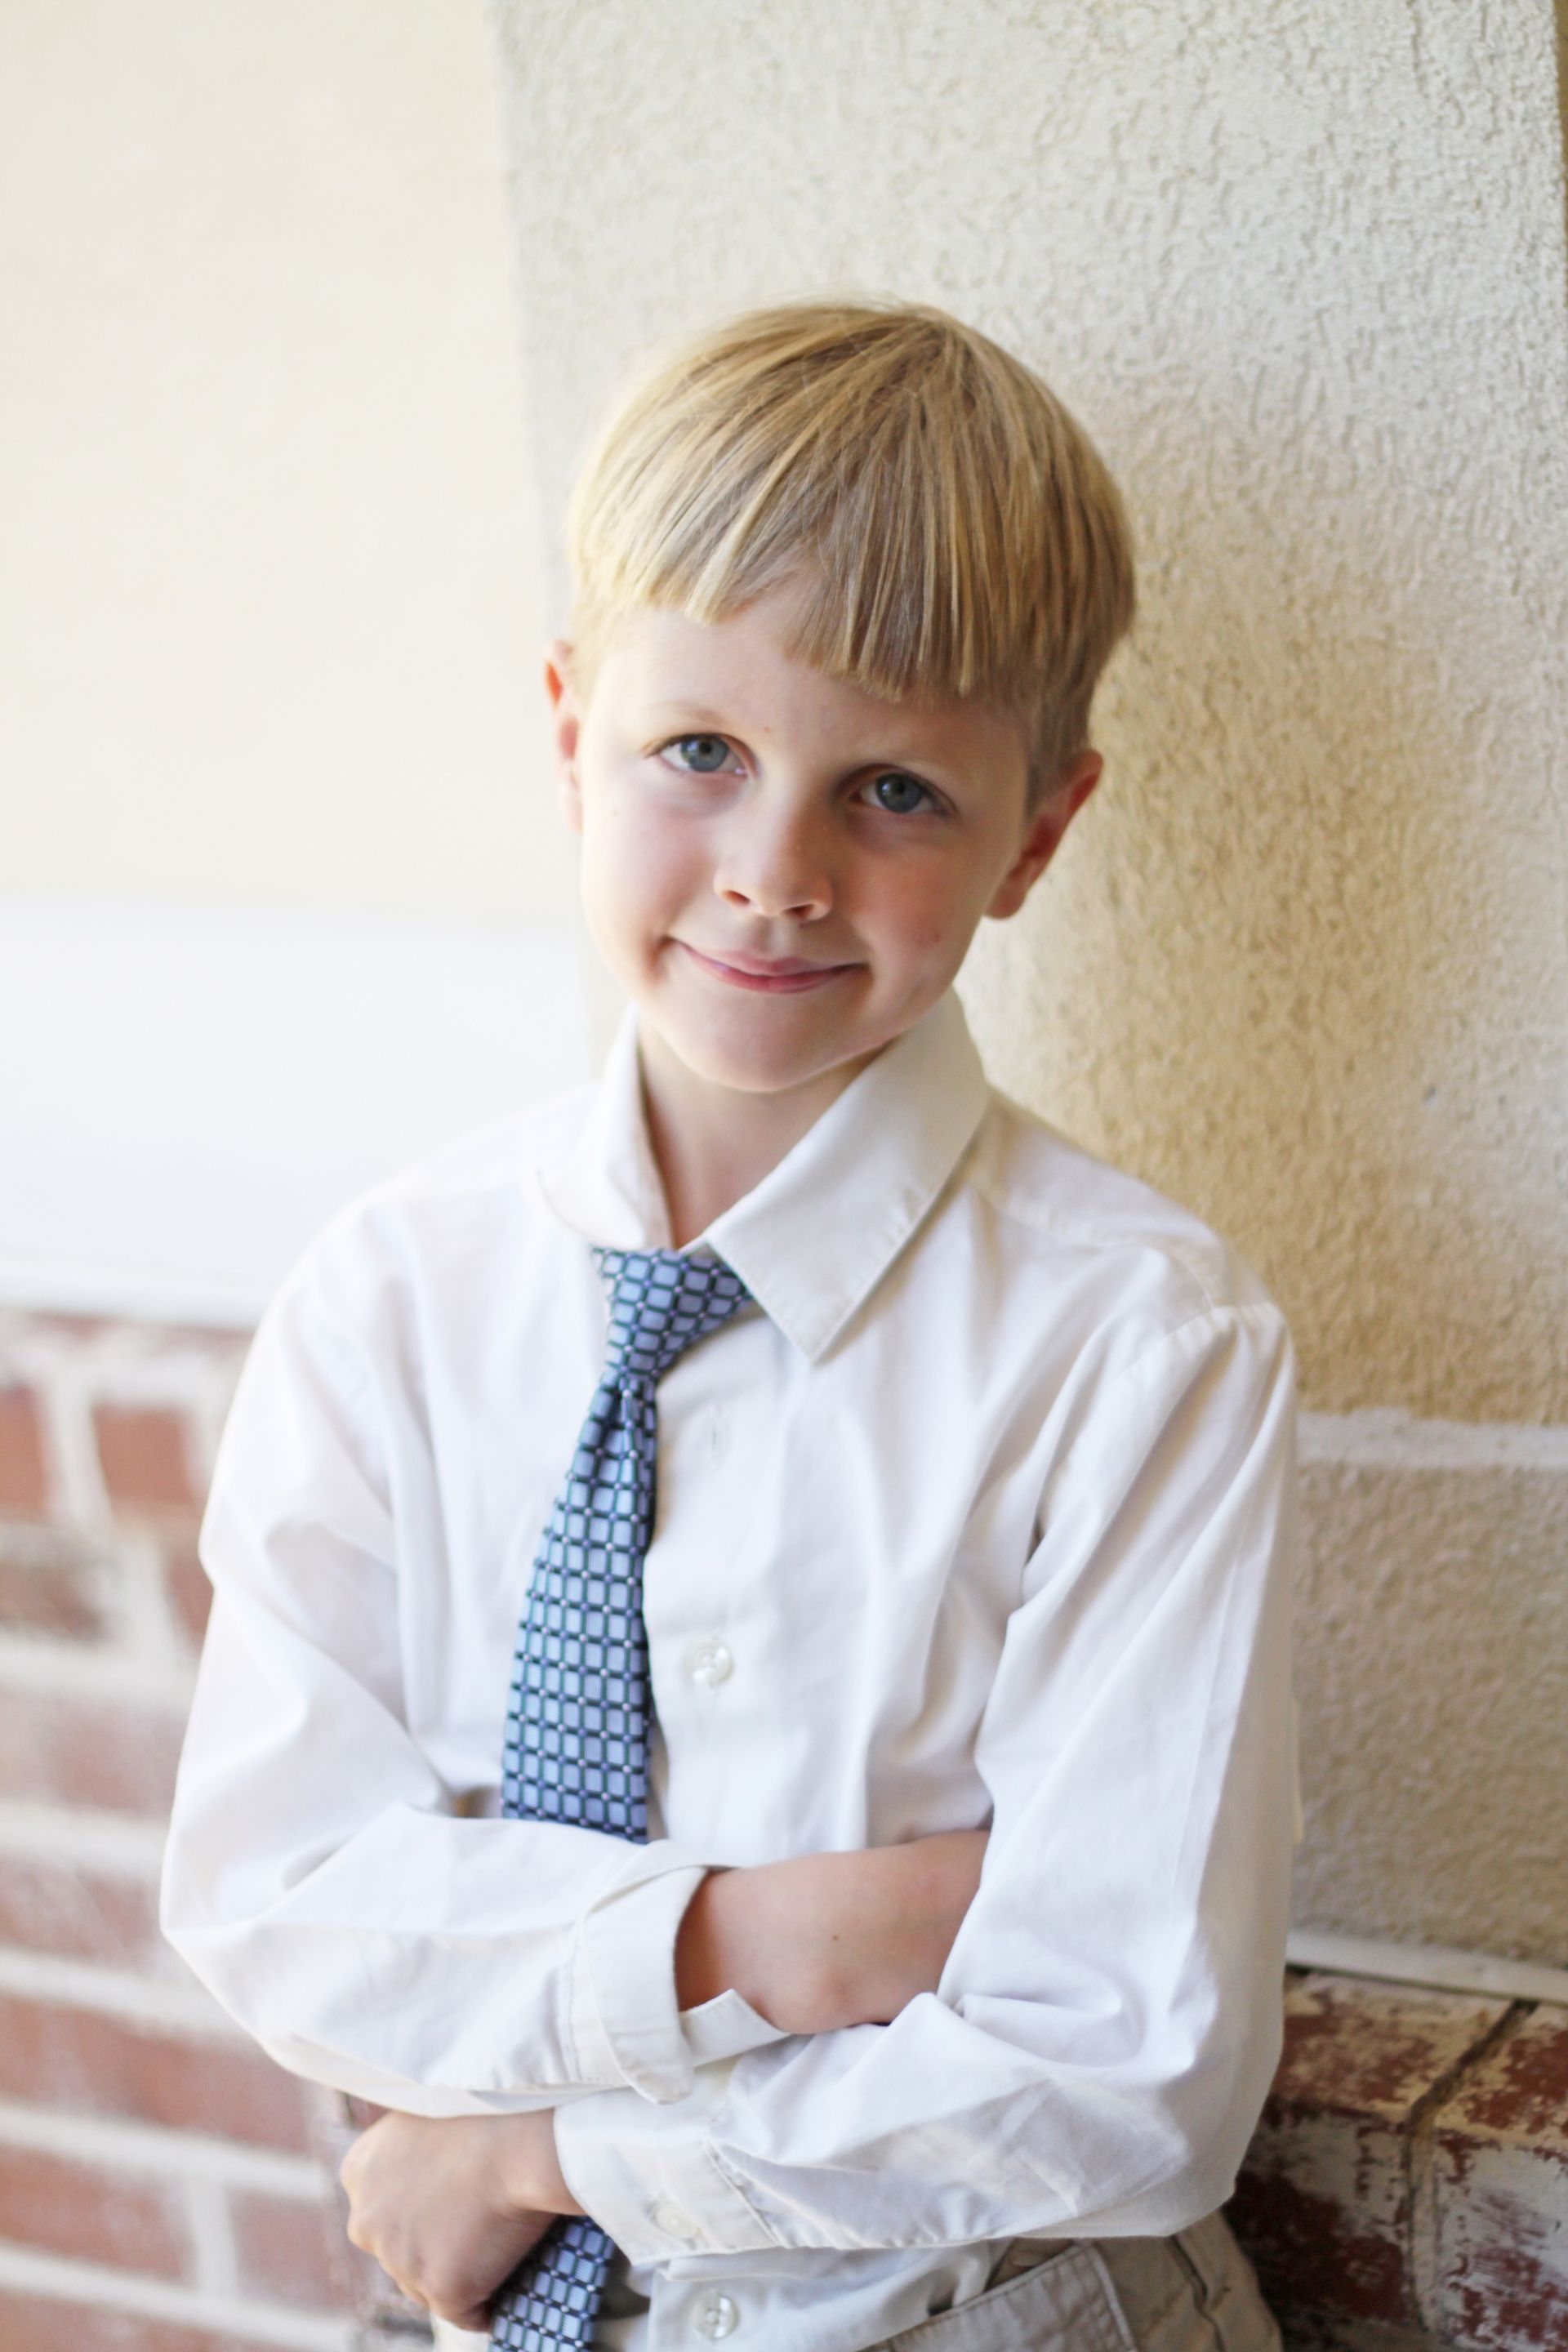 A portrait of a young boy in a white shirt and tie.